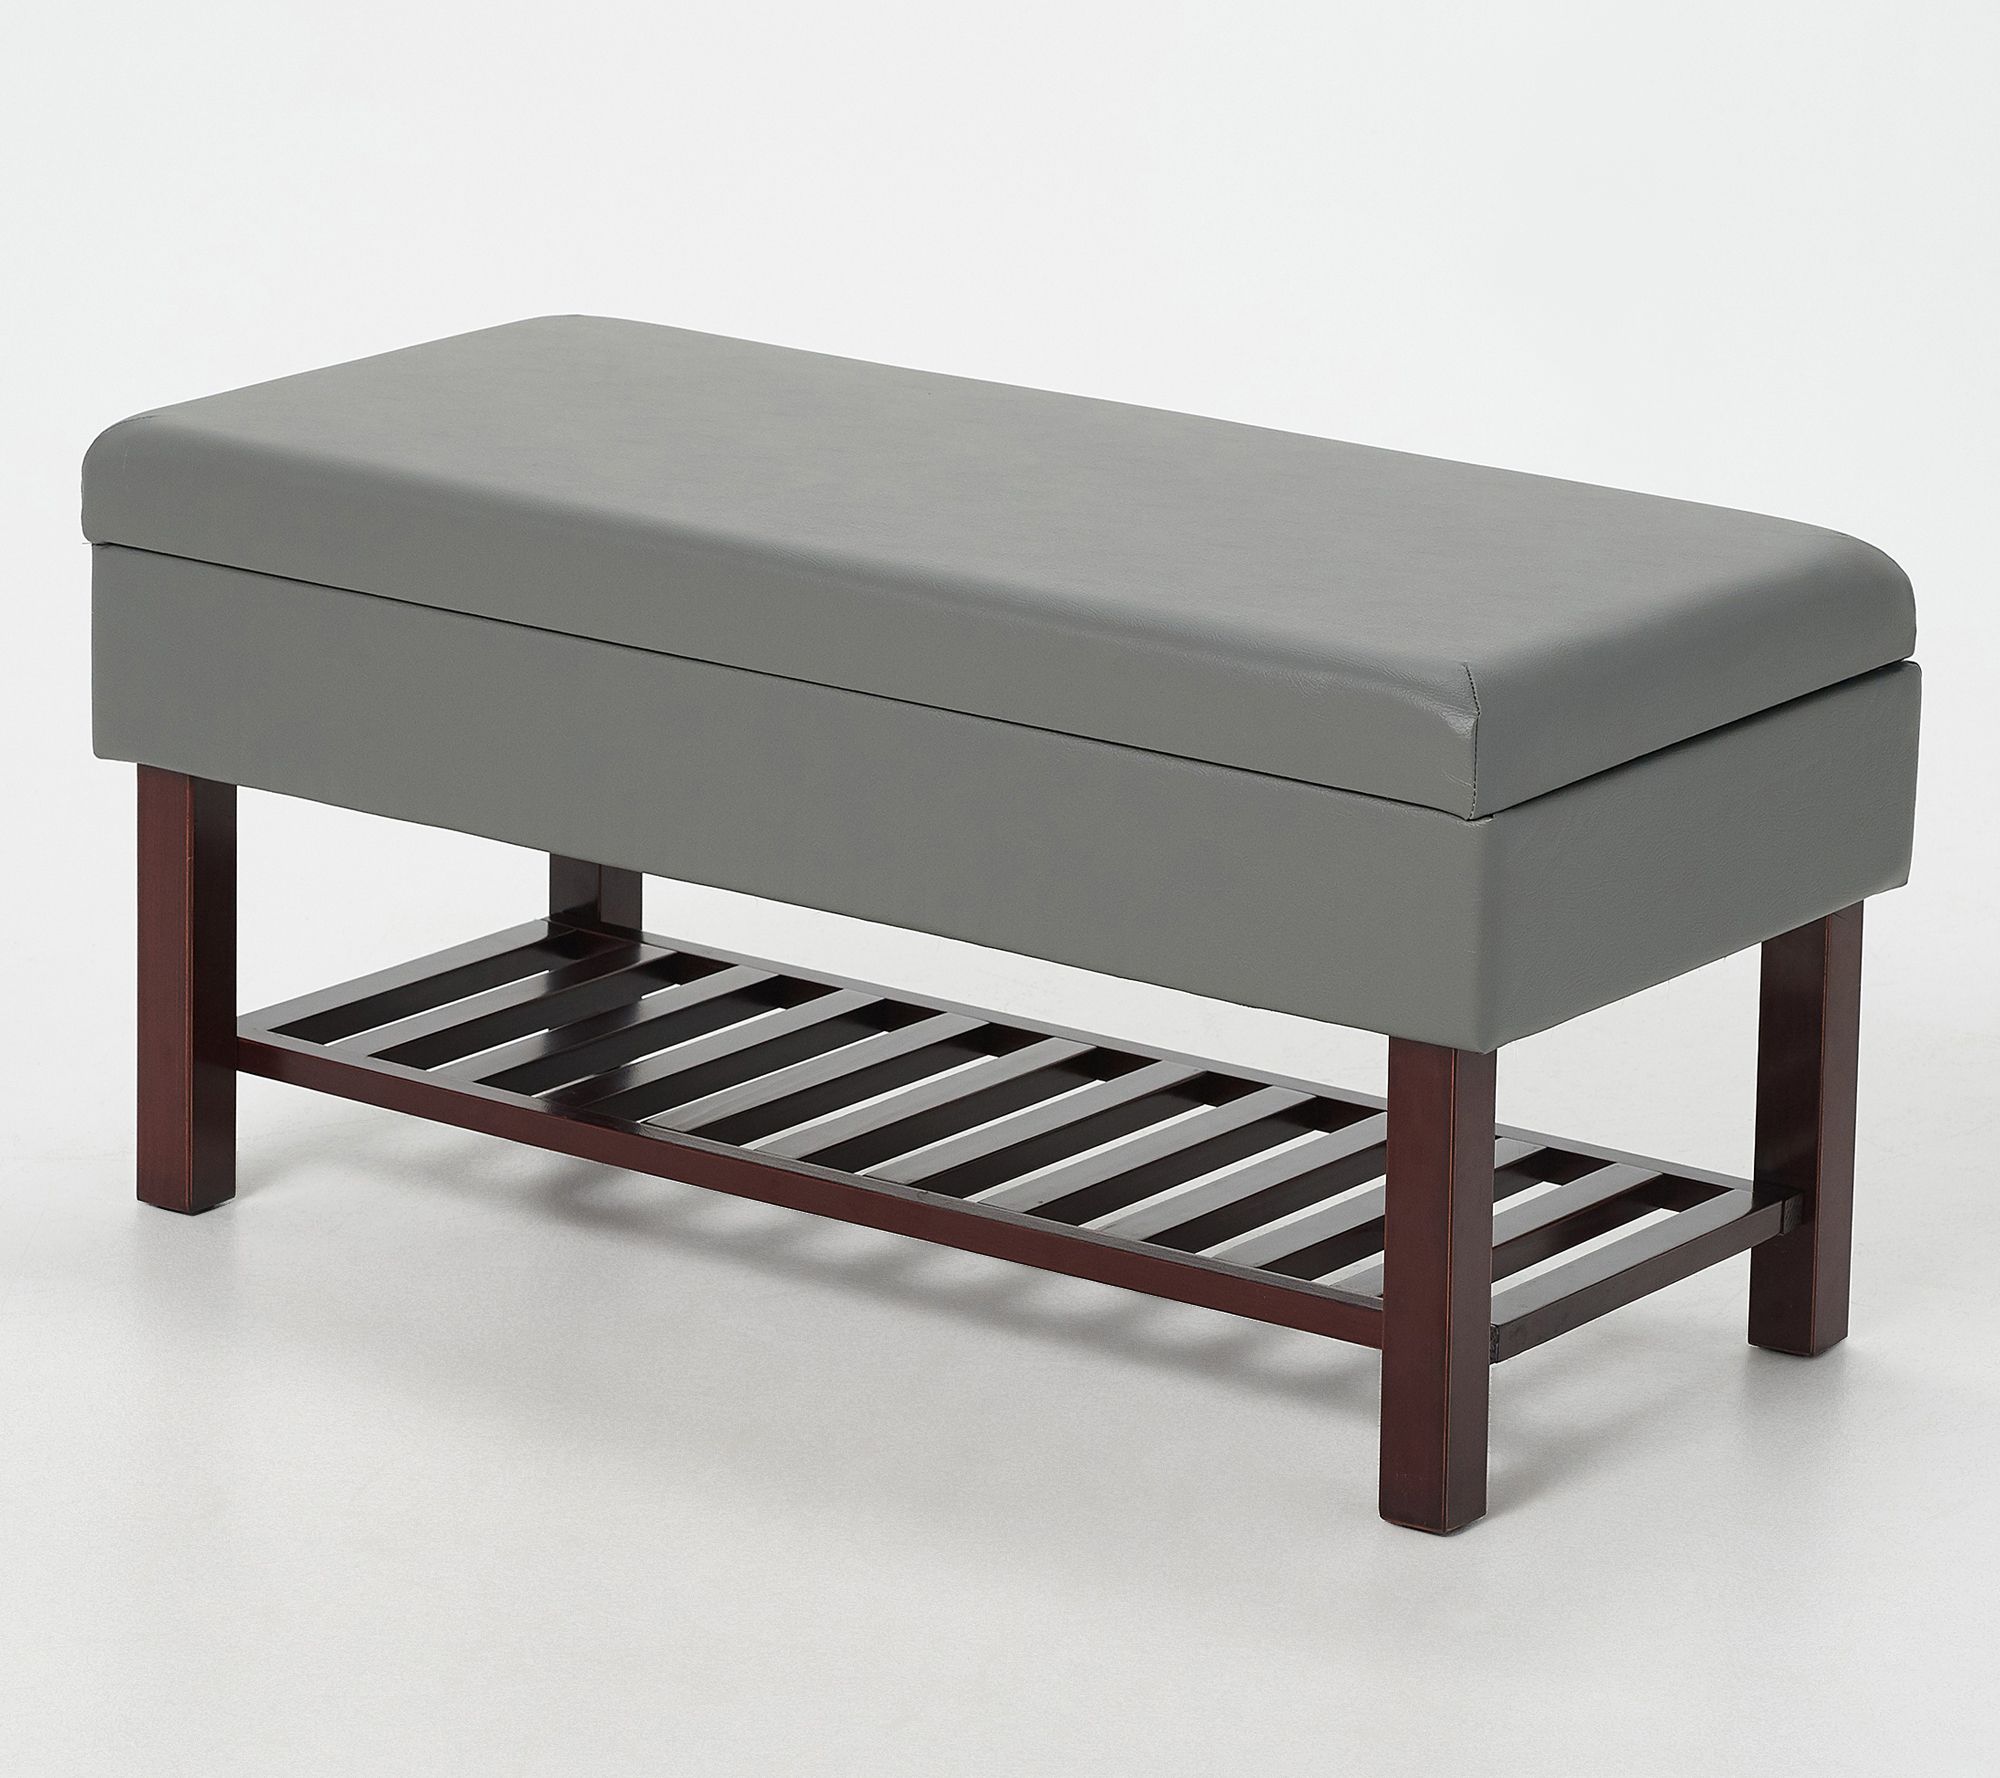 Faux Leather Storage Bench, Storage Leather Bench